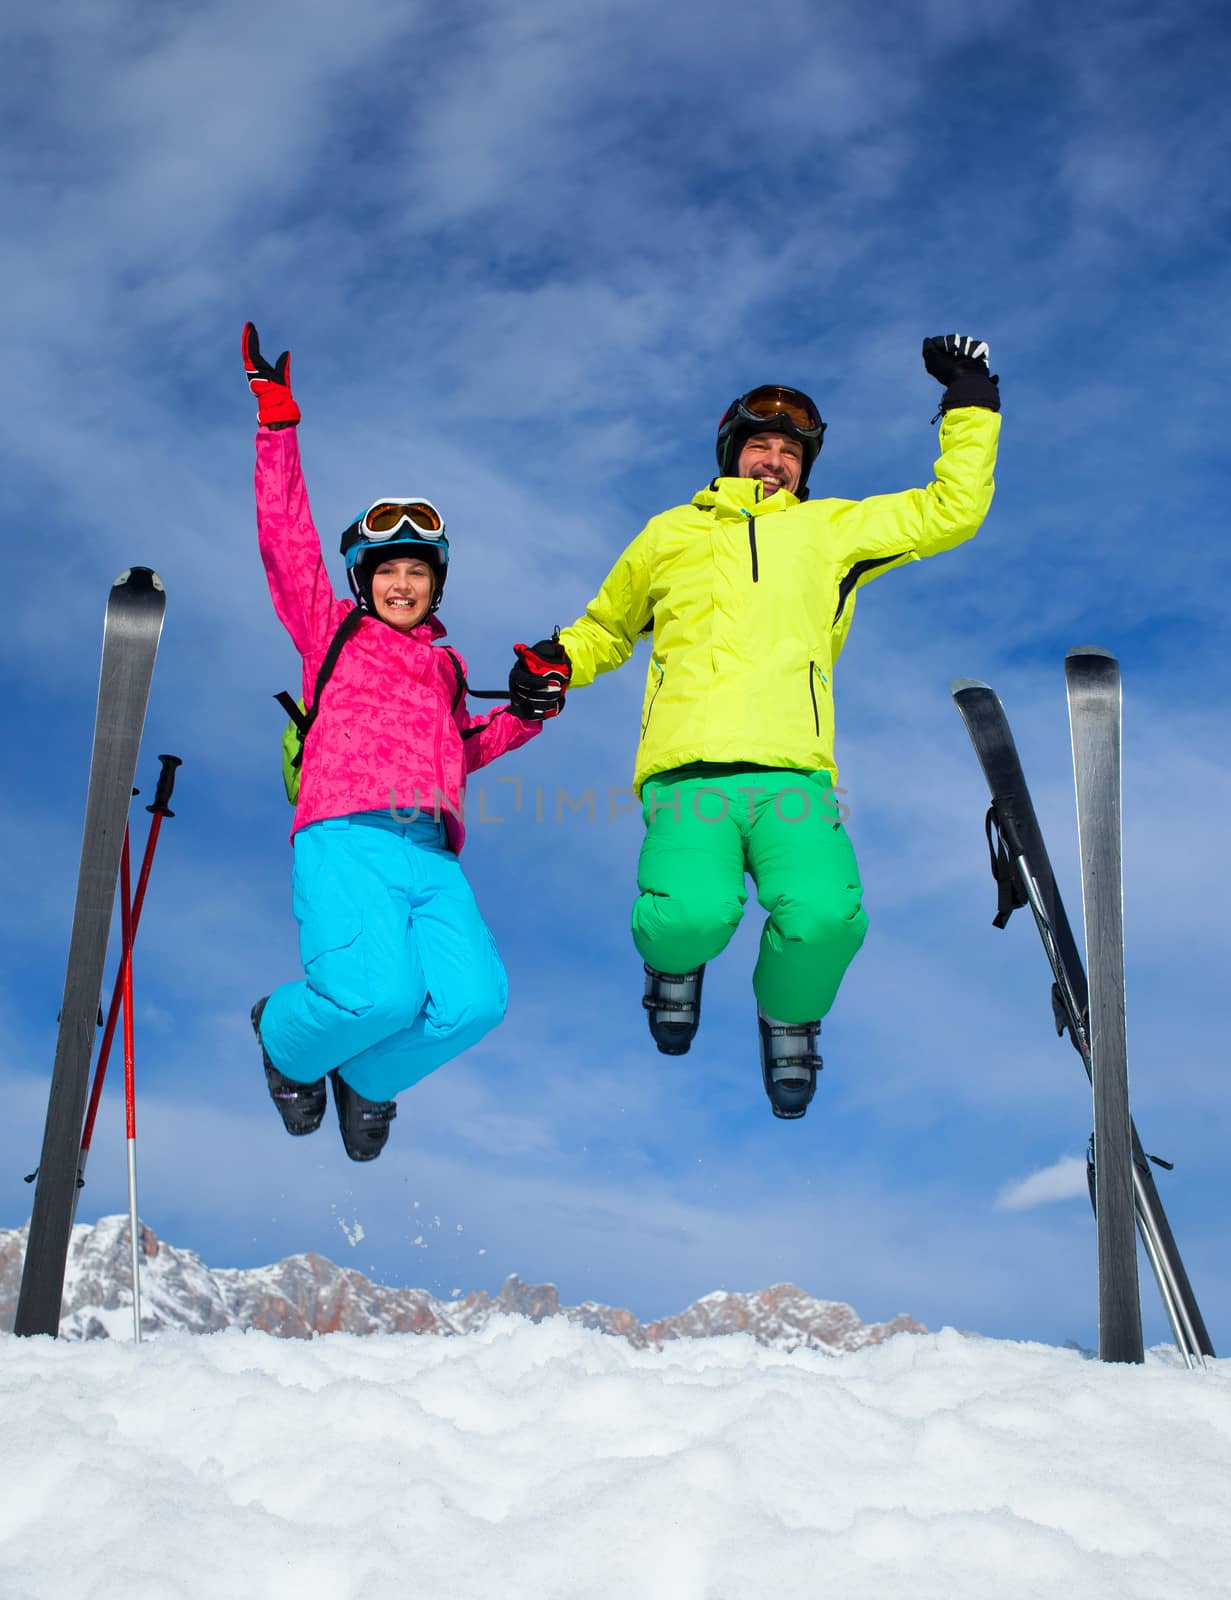 Ski, winter, snow, skiers, sun and fun - family enjoying winter vacations. Father with his daughter jumping against blue sky.